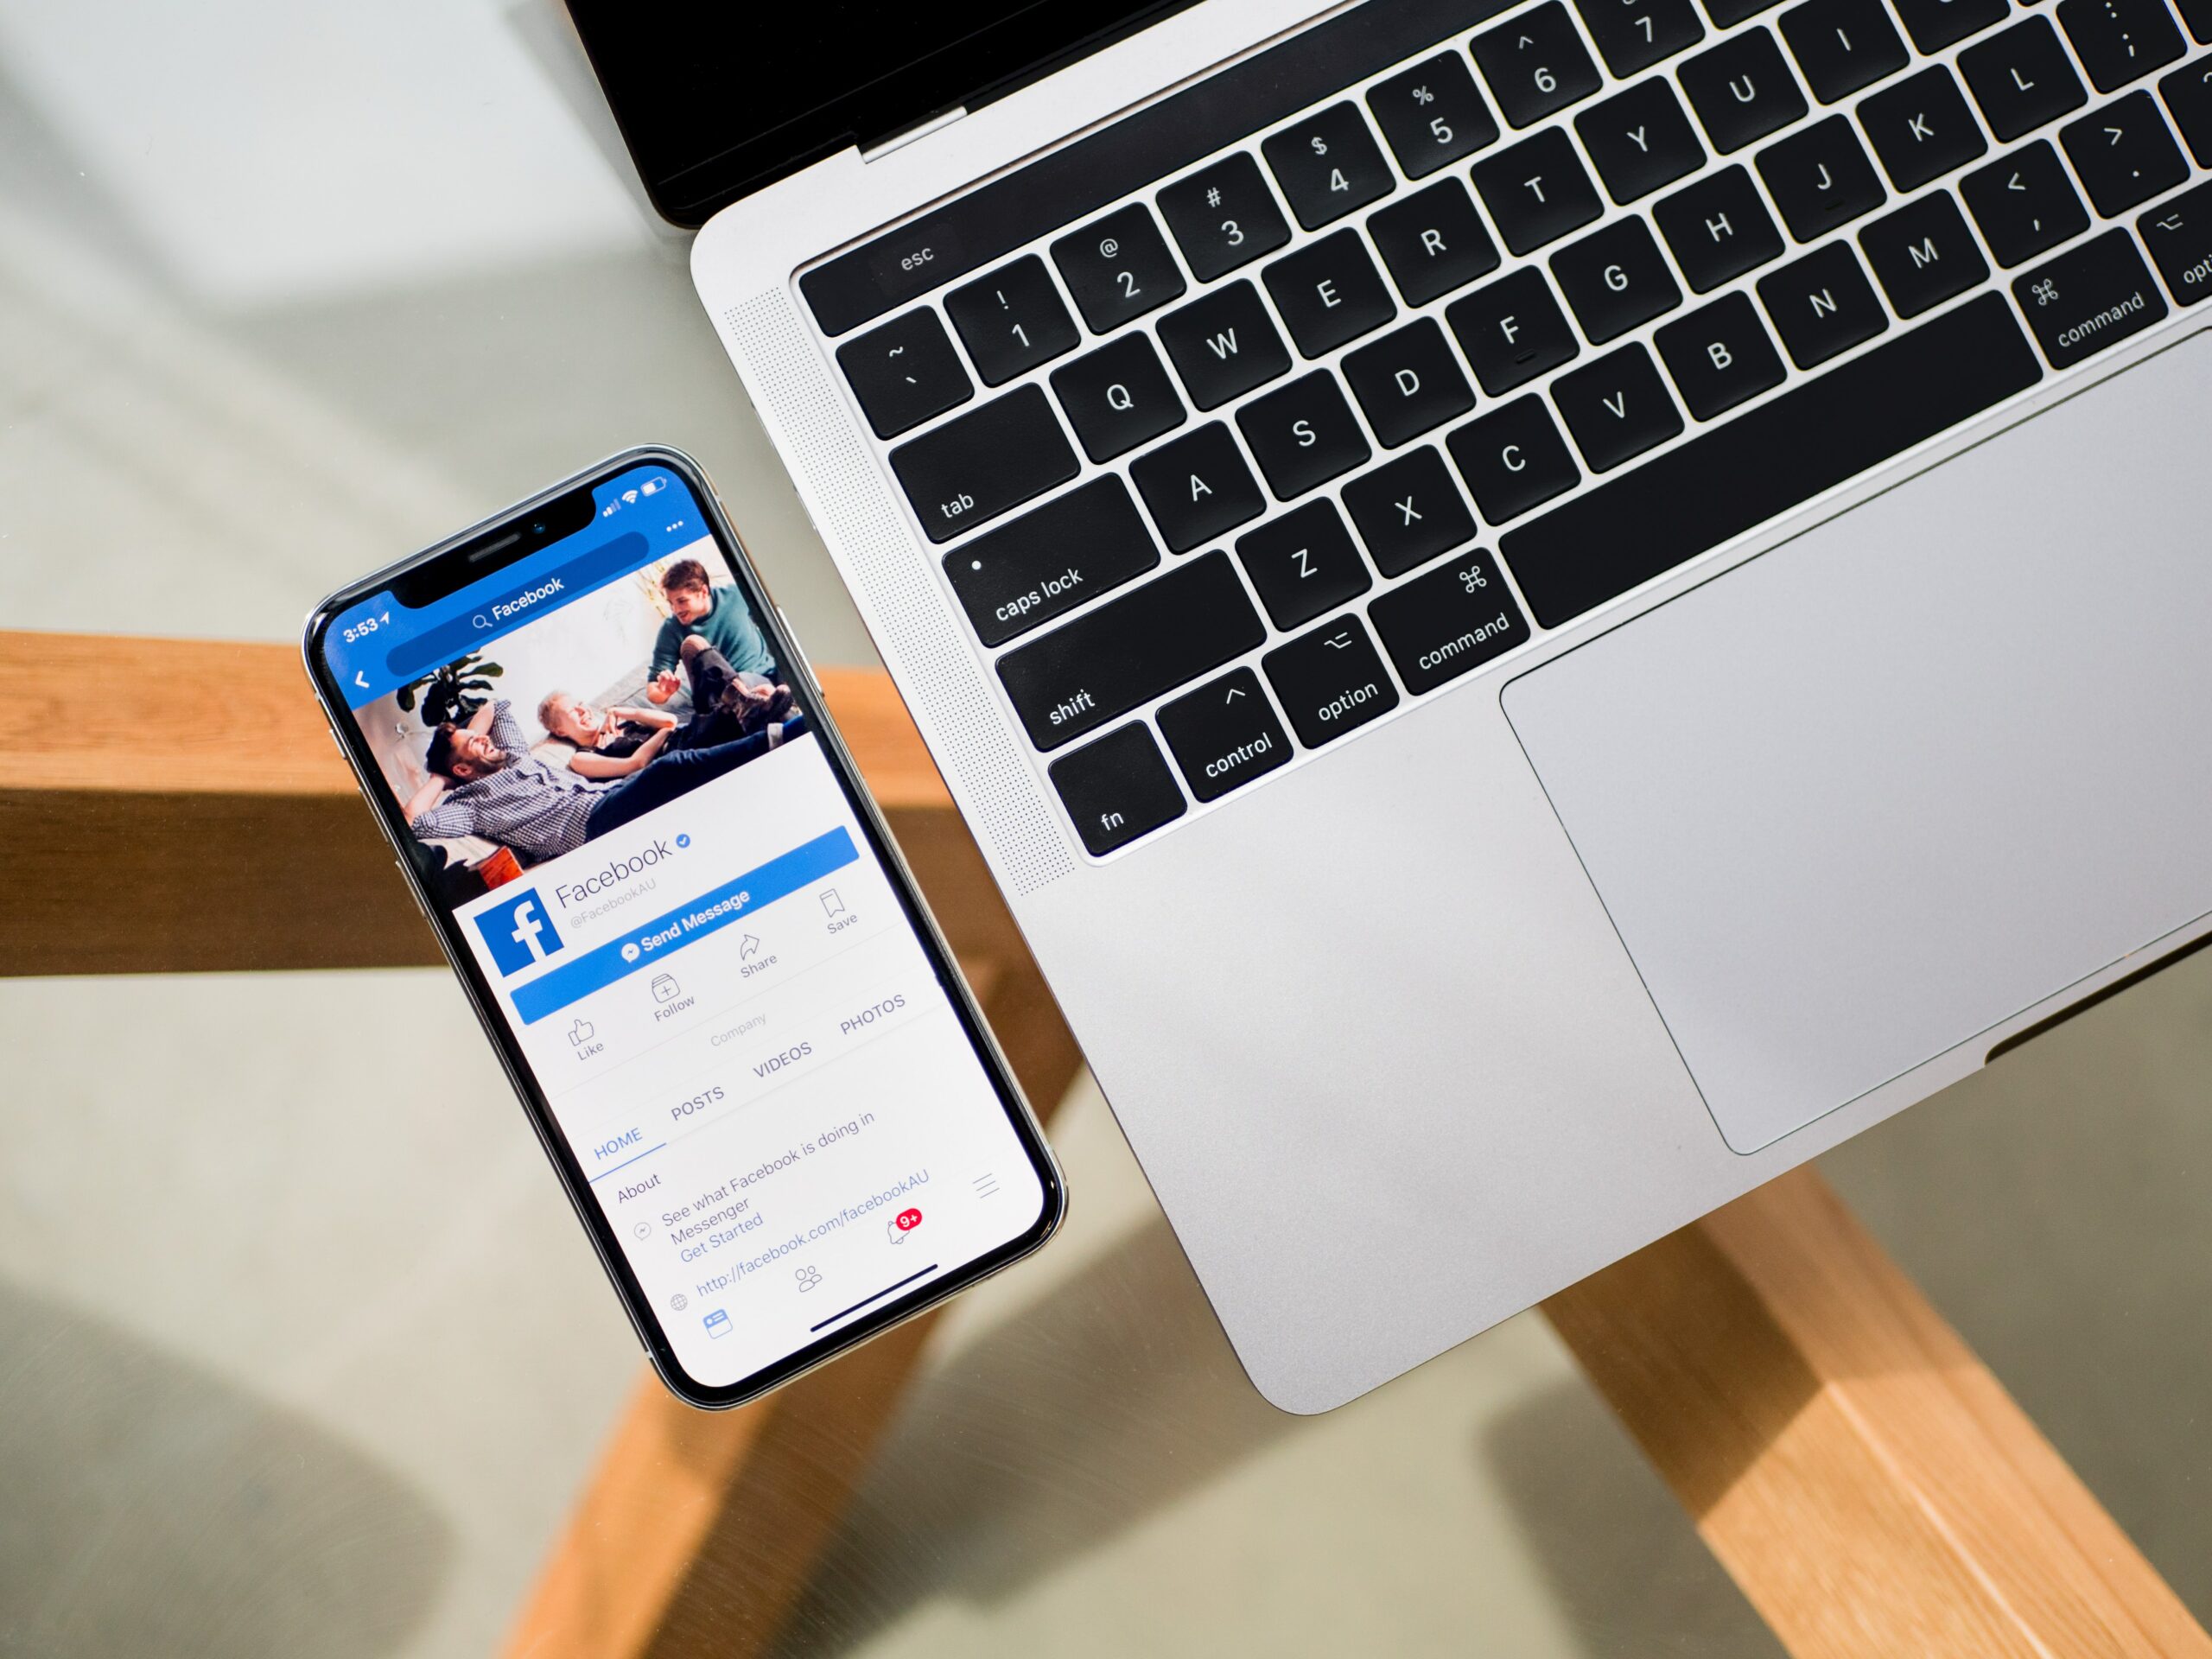 How Can I Recover My Facebook Account Without Two-Factor Authentication?